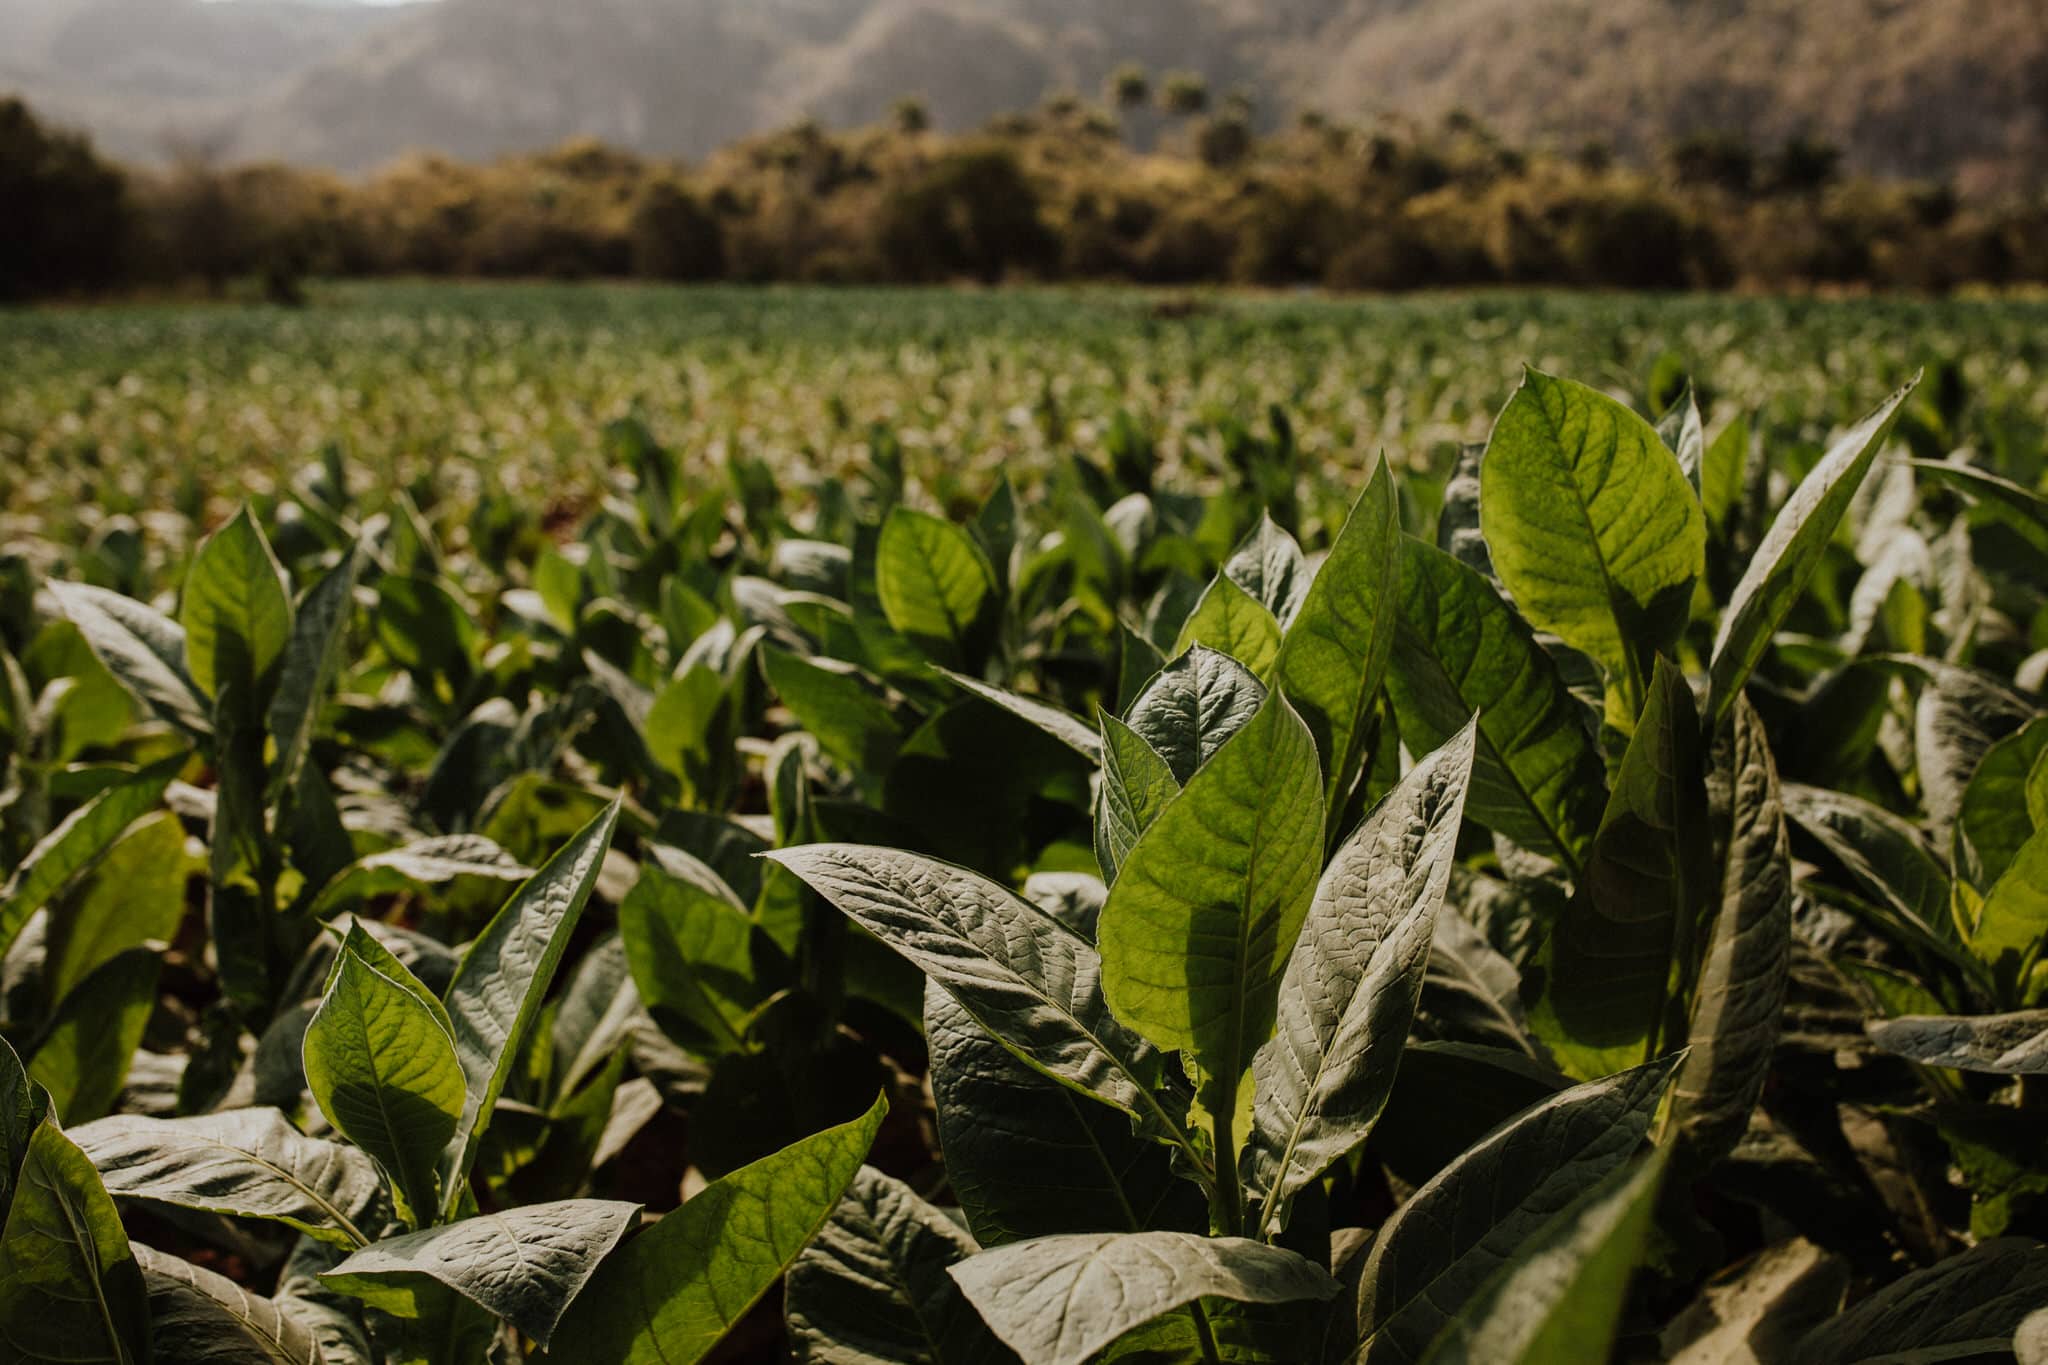 Tobacco crops in Vinales, Cuba. Wedding and travel photographer Brent Calis.